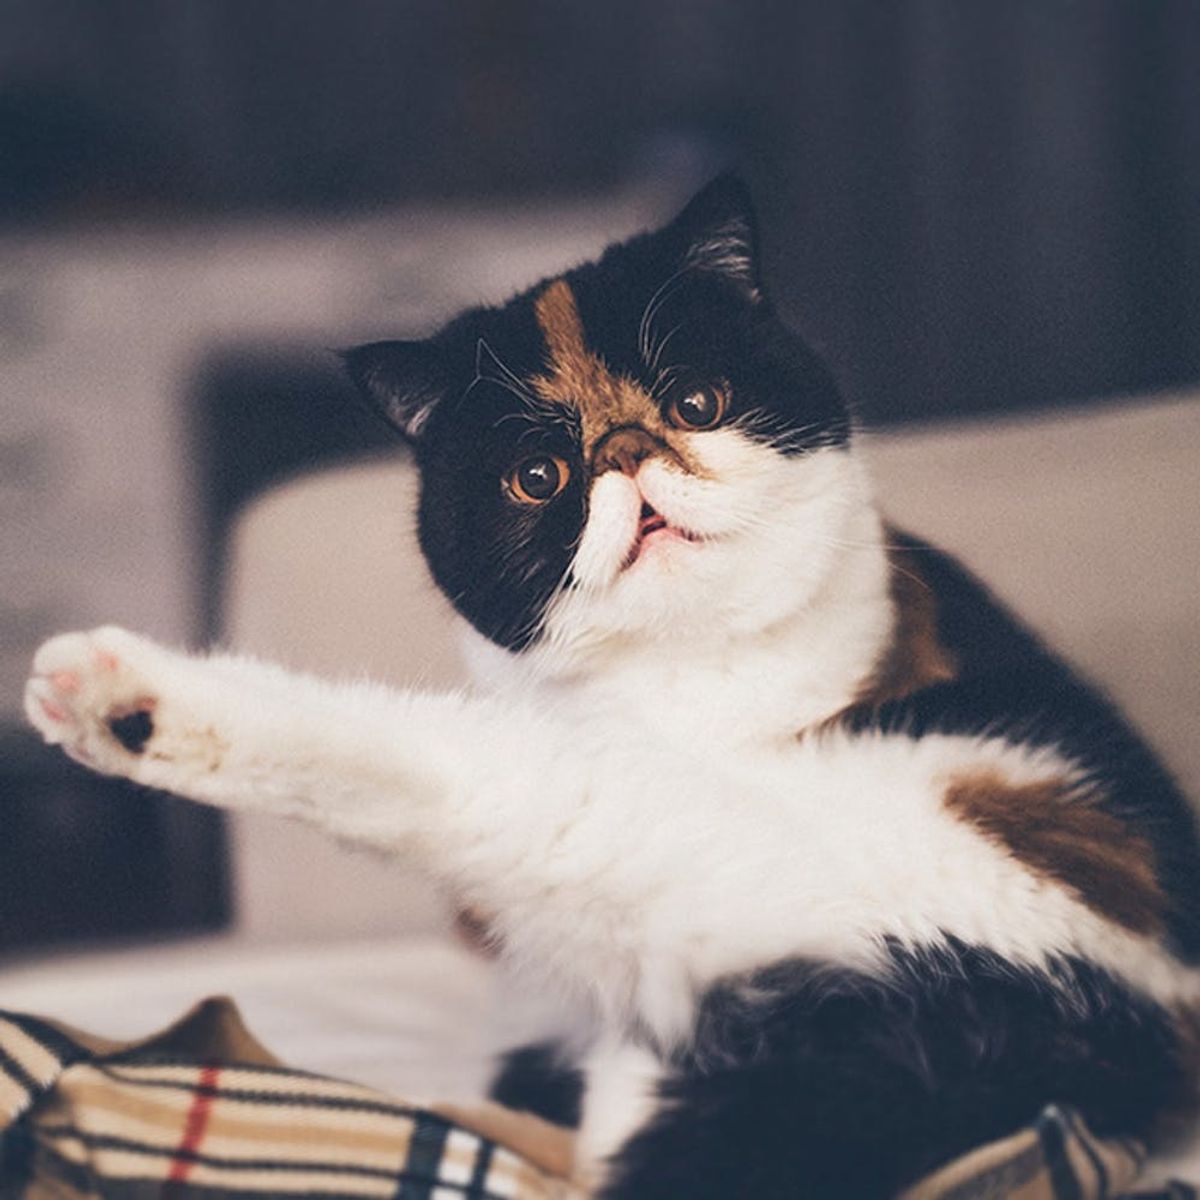 5 Things All Cat Ladies Can Relate To